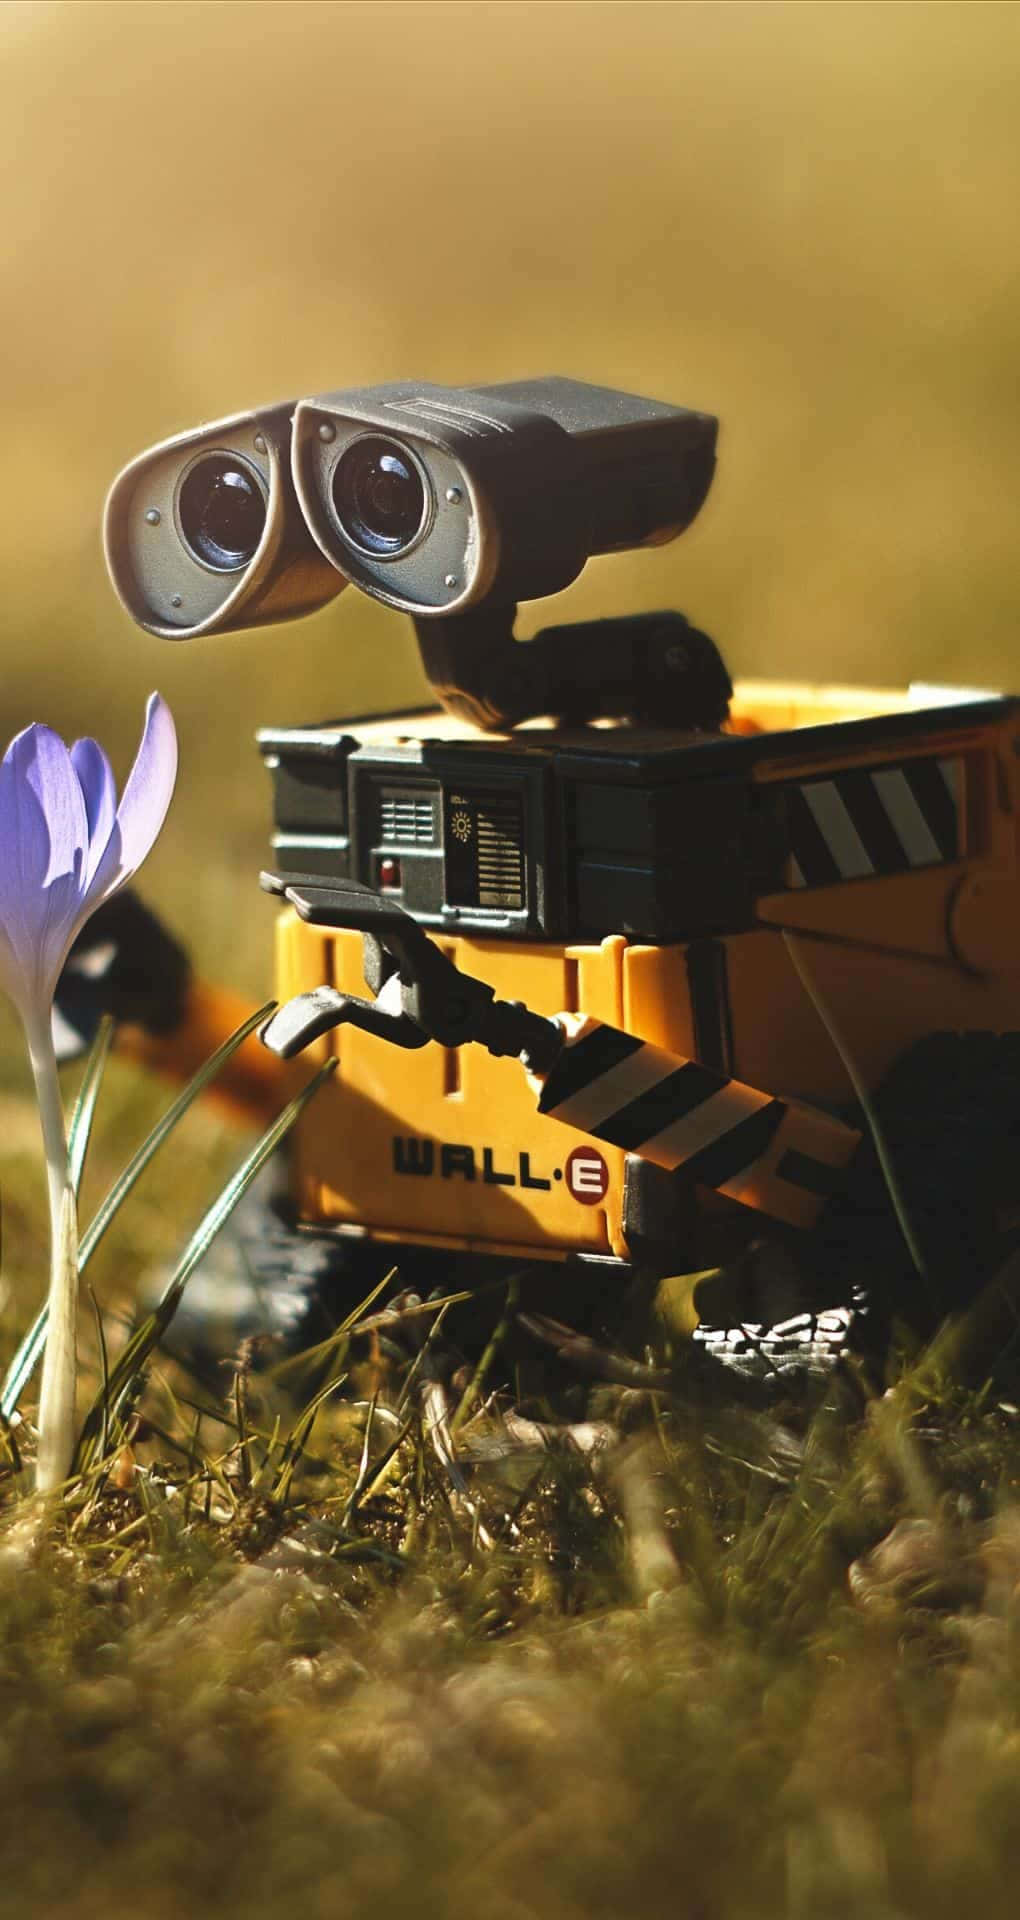 Vælg blomst Wall E Iphone Wallpaper